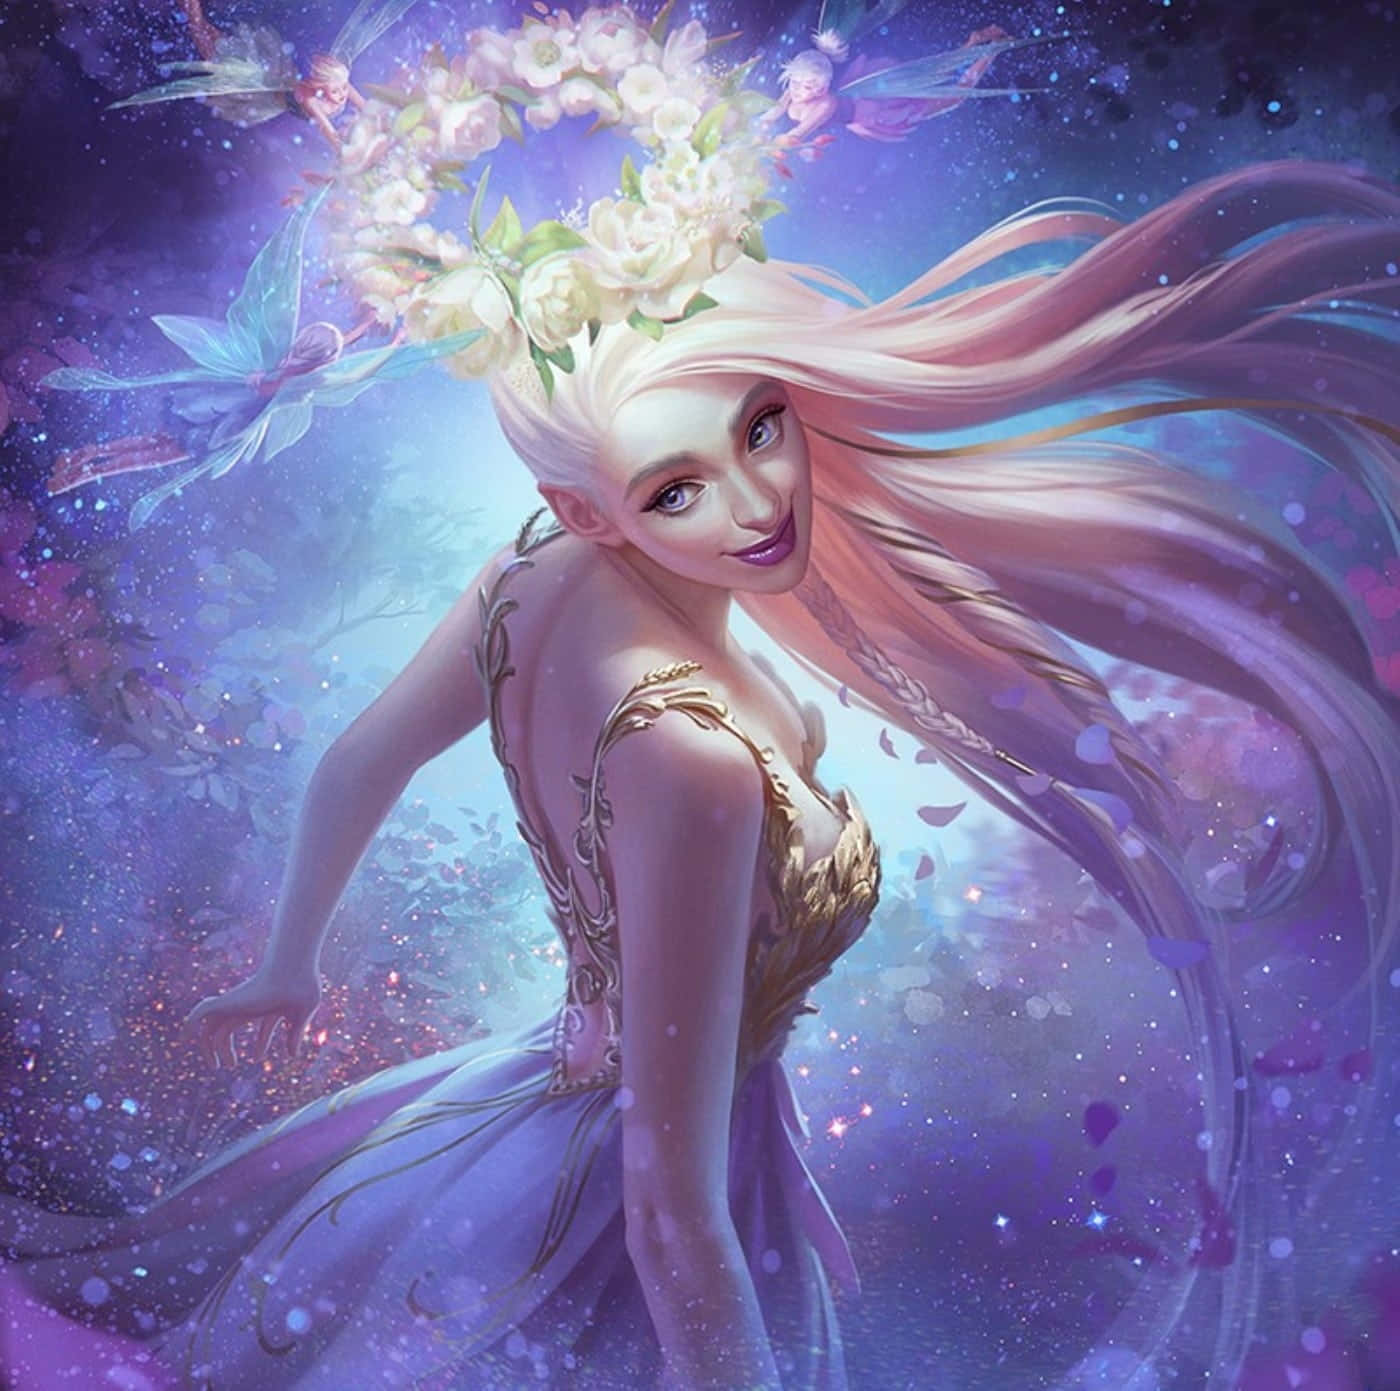 Beautiful fairy with glowing wings in a wonderful fantasy world